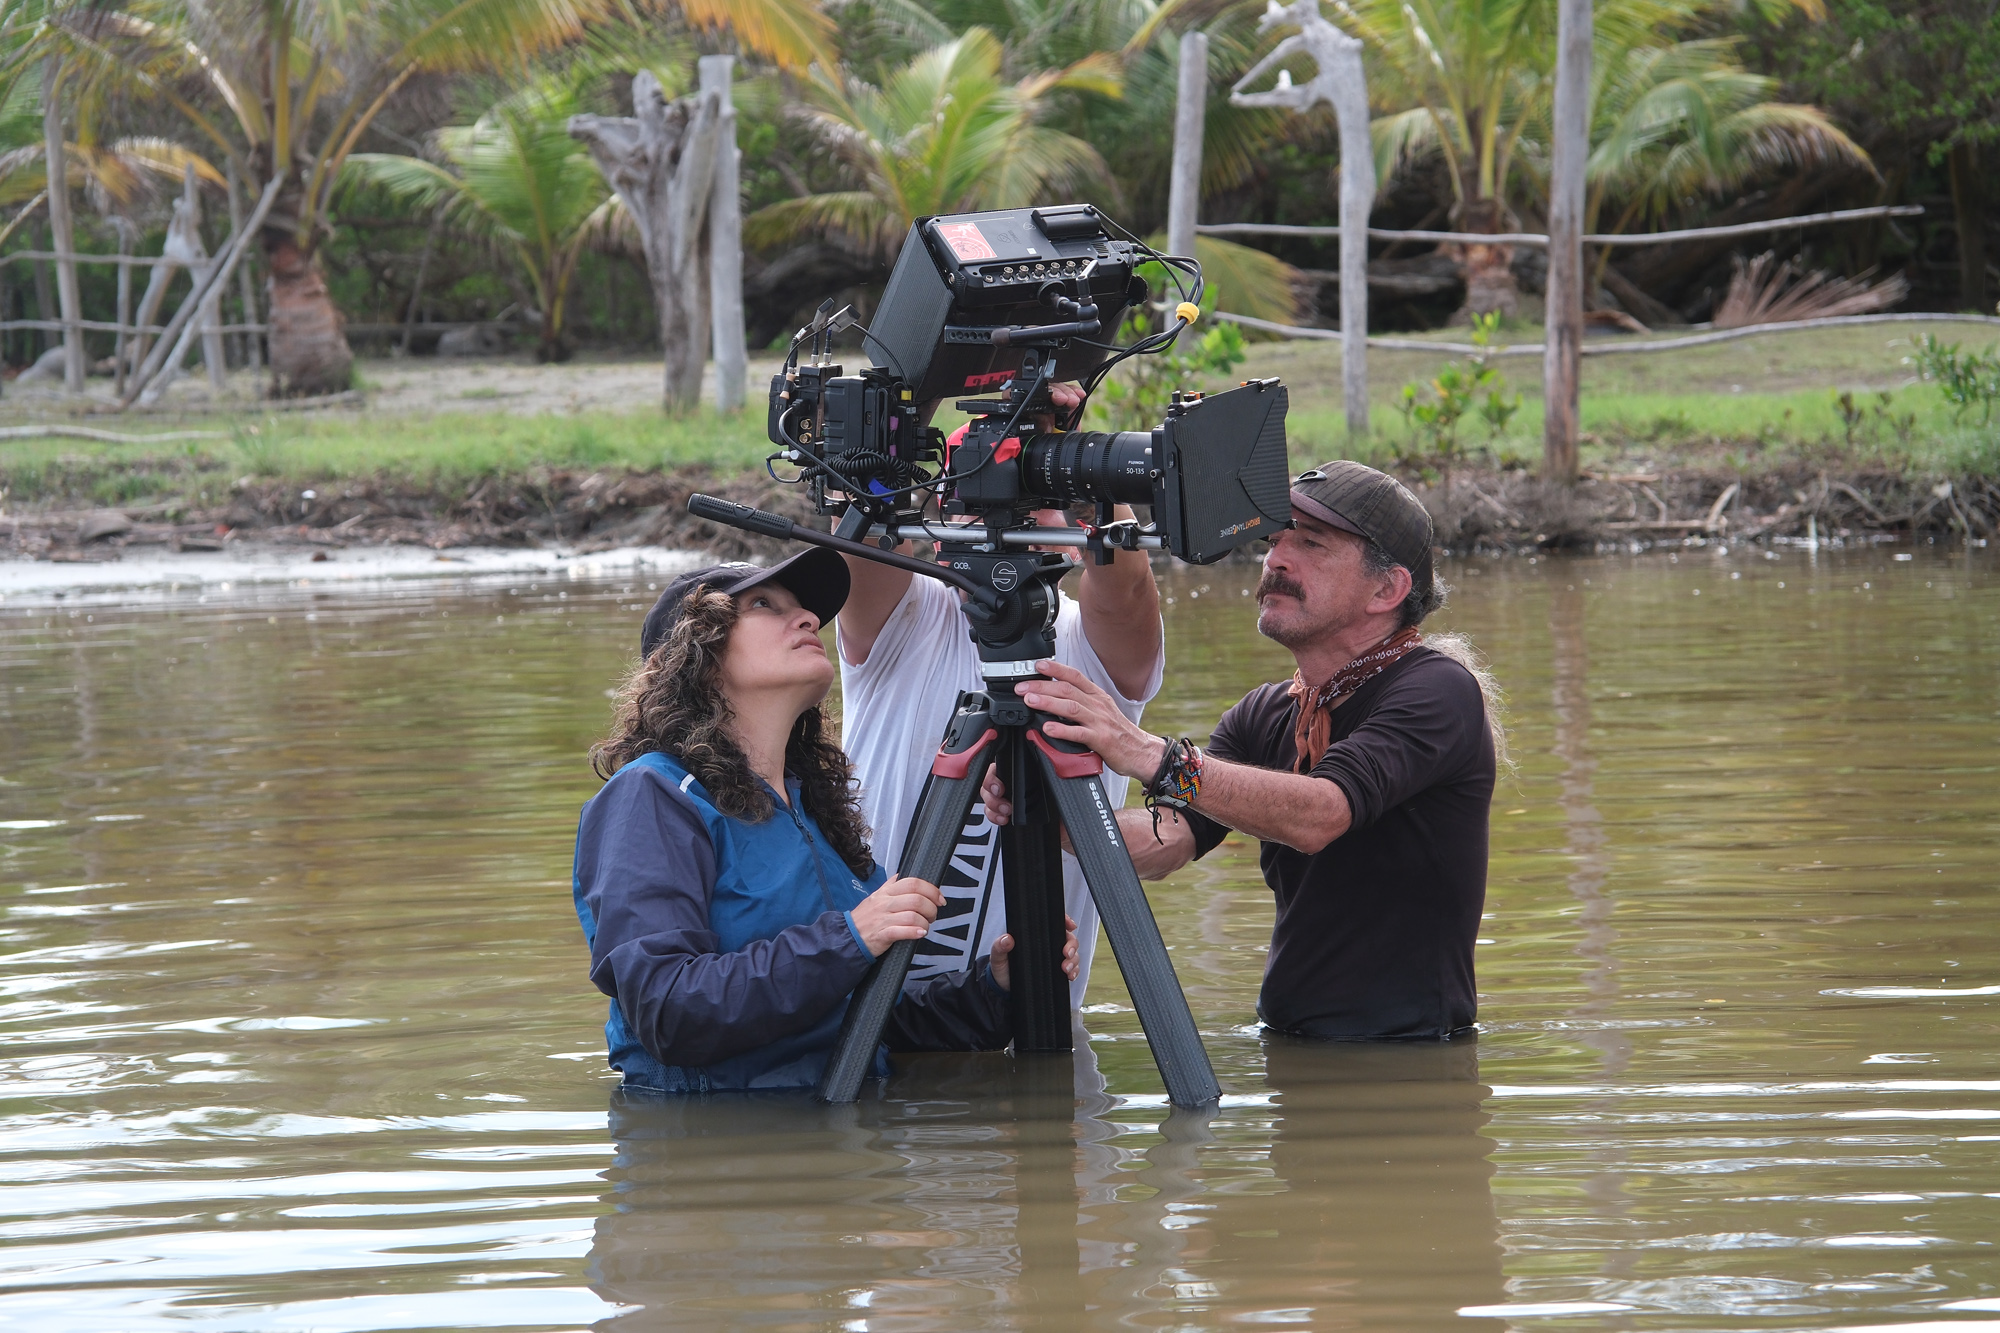 Two people stand submerged in lake water from the waist down, tampering with the controls of an X-H2 camera